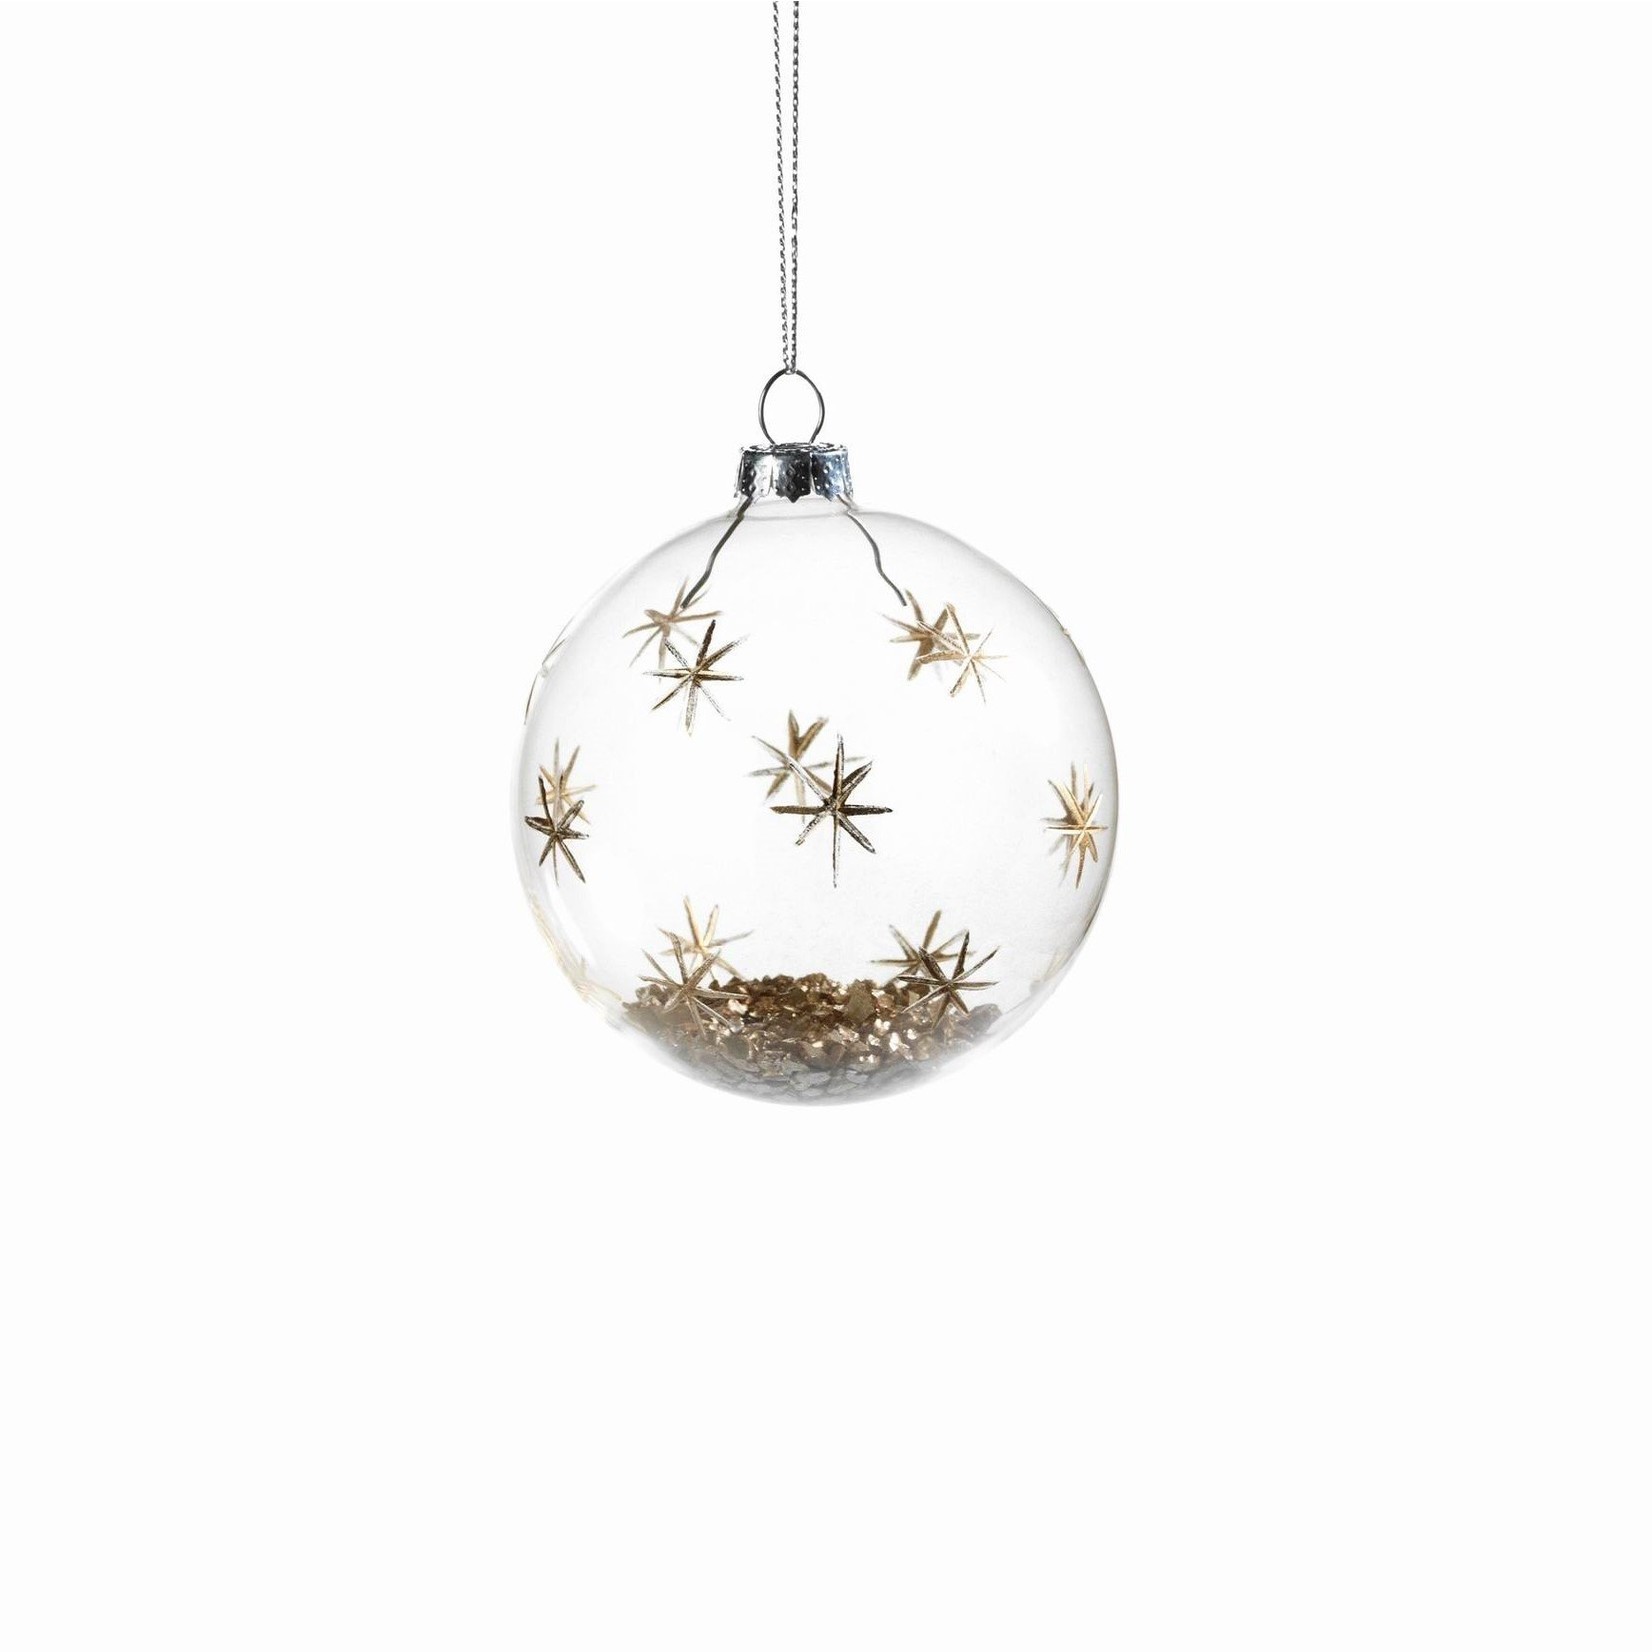 Zodax Clear Ball With Decoration Ornament - Medium